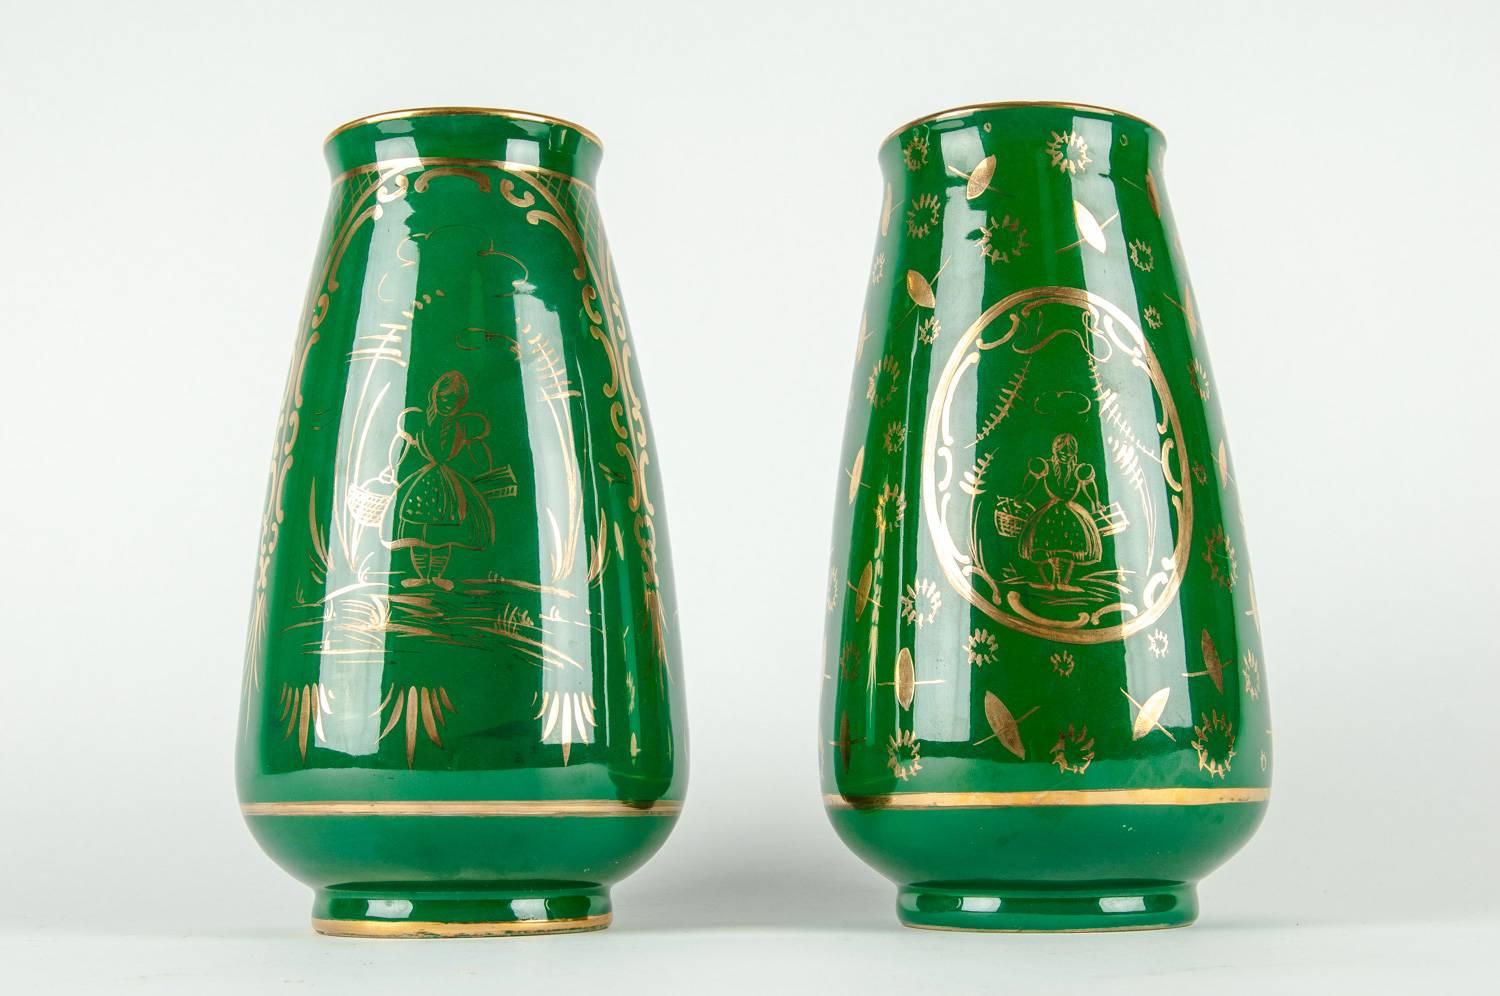 Mid-20th century pair porcelain decorative vases / pieces with exterior gilt design details. Each vase is in great vintage condition. Maker's mark undersigned & numbered. Each vase stands about 10 inches high x 5 inches diameter.